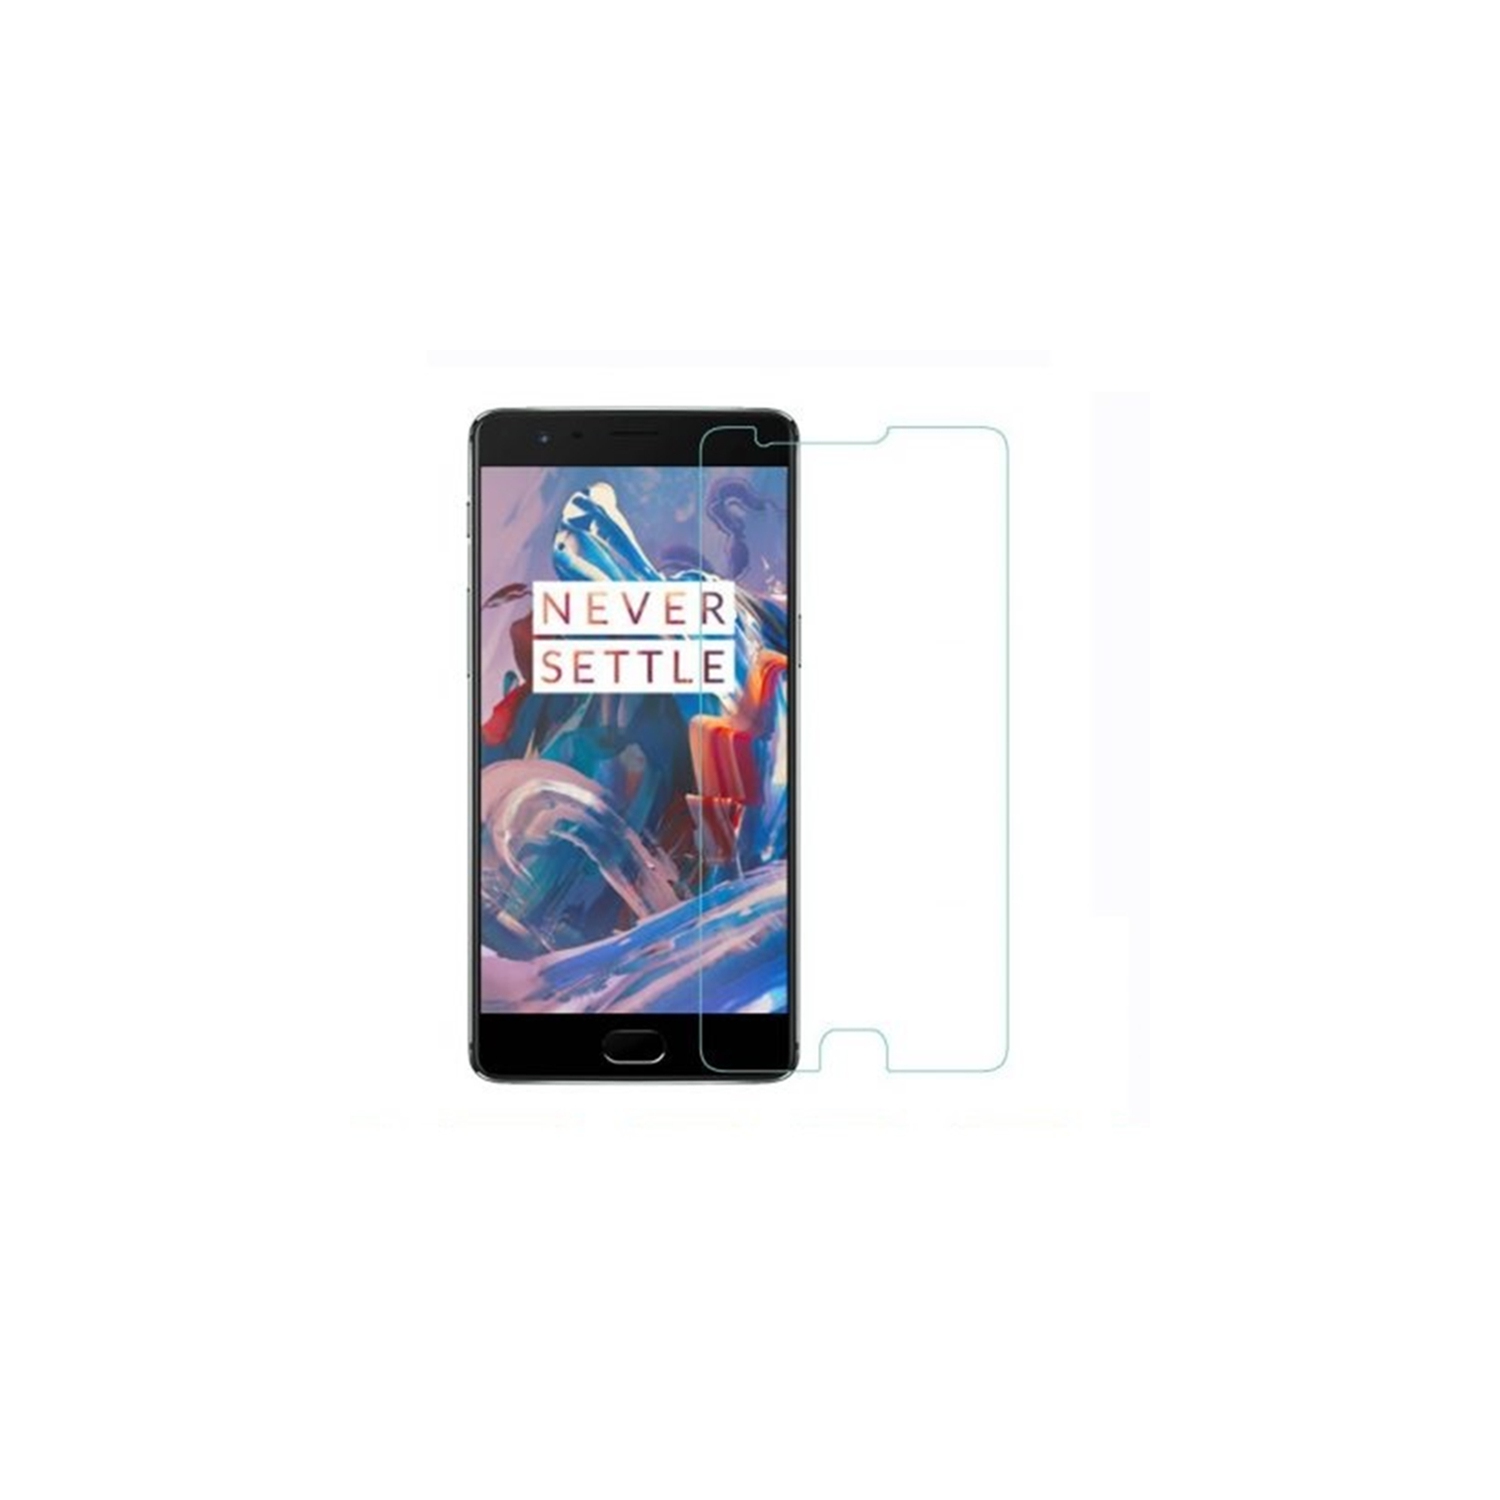 【2 Packs】 CSmart Premium Tempered Glass Screen Protector for OnePlus Three 3, Case Friendly & Bubble Free